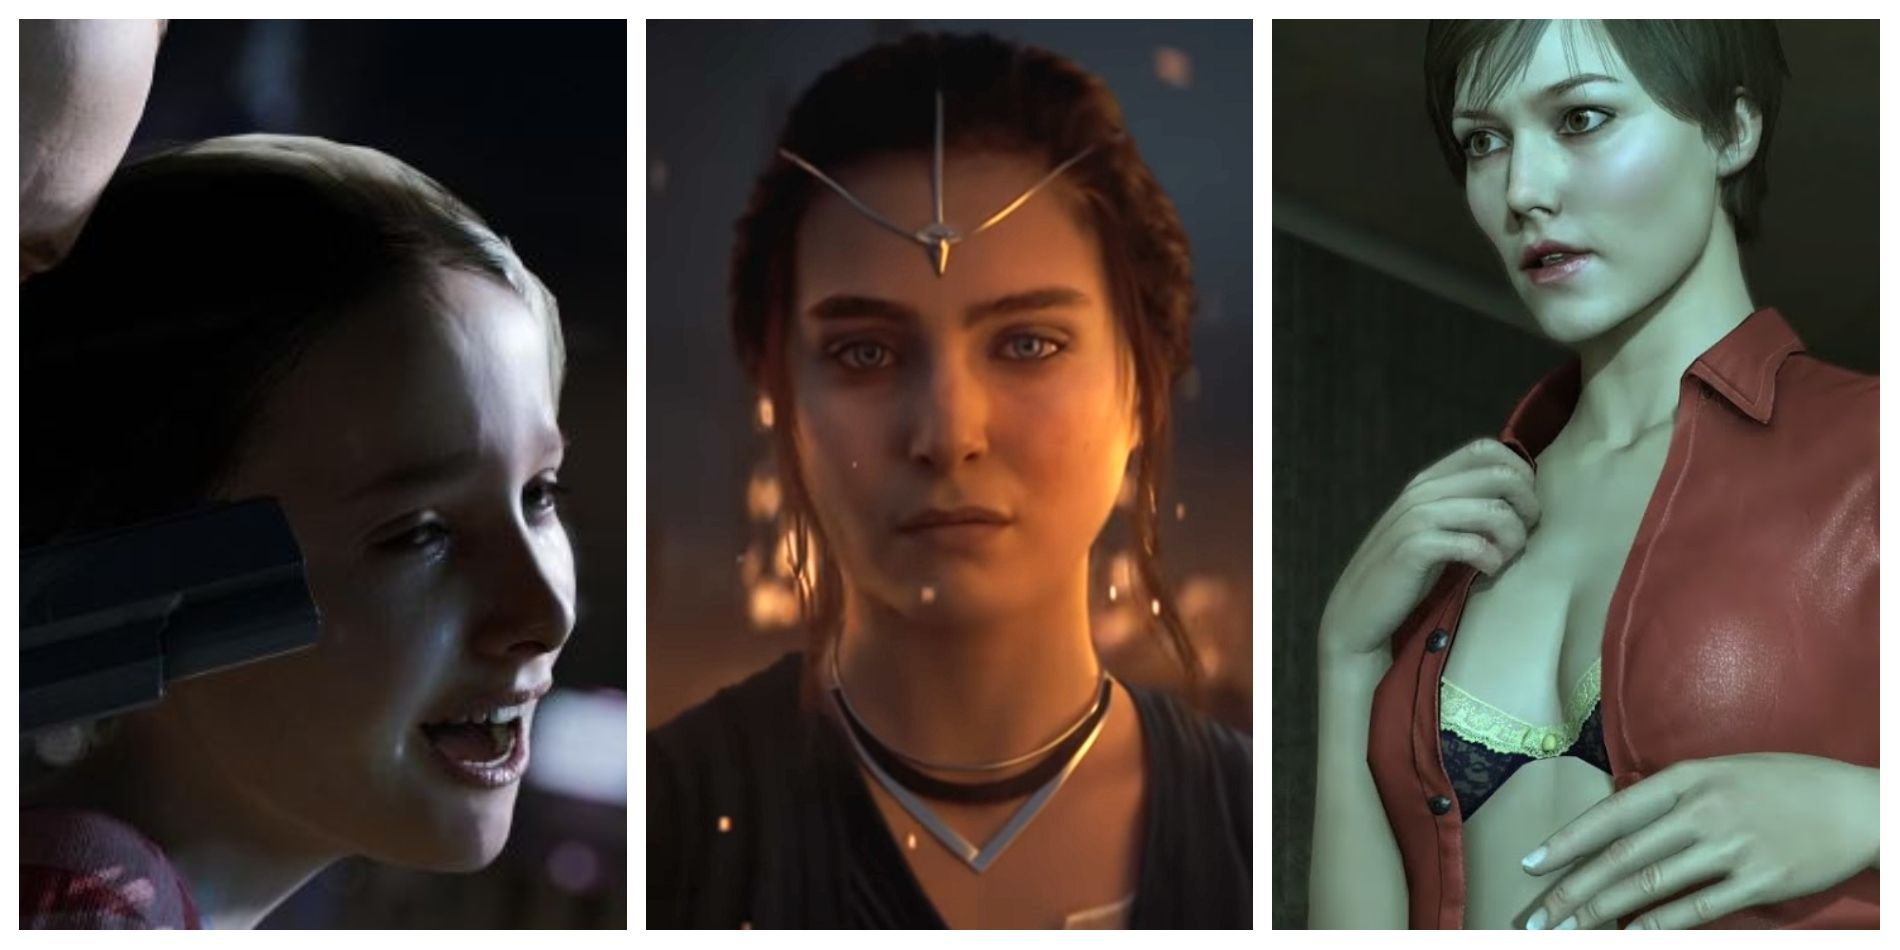 David Cage's Star Wars Game Is Disney's Worst Franchise Decision - Star Wars Eclipse Heavy Rain Detroit Become Human